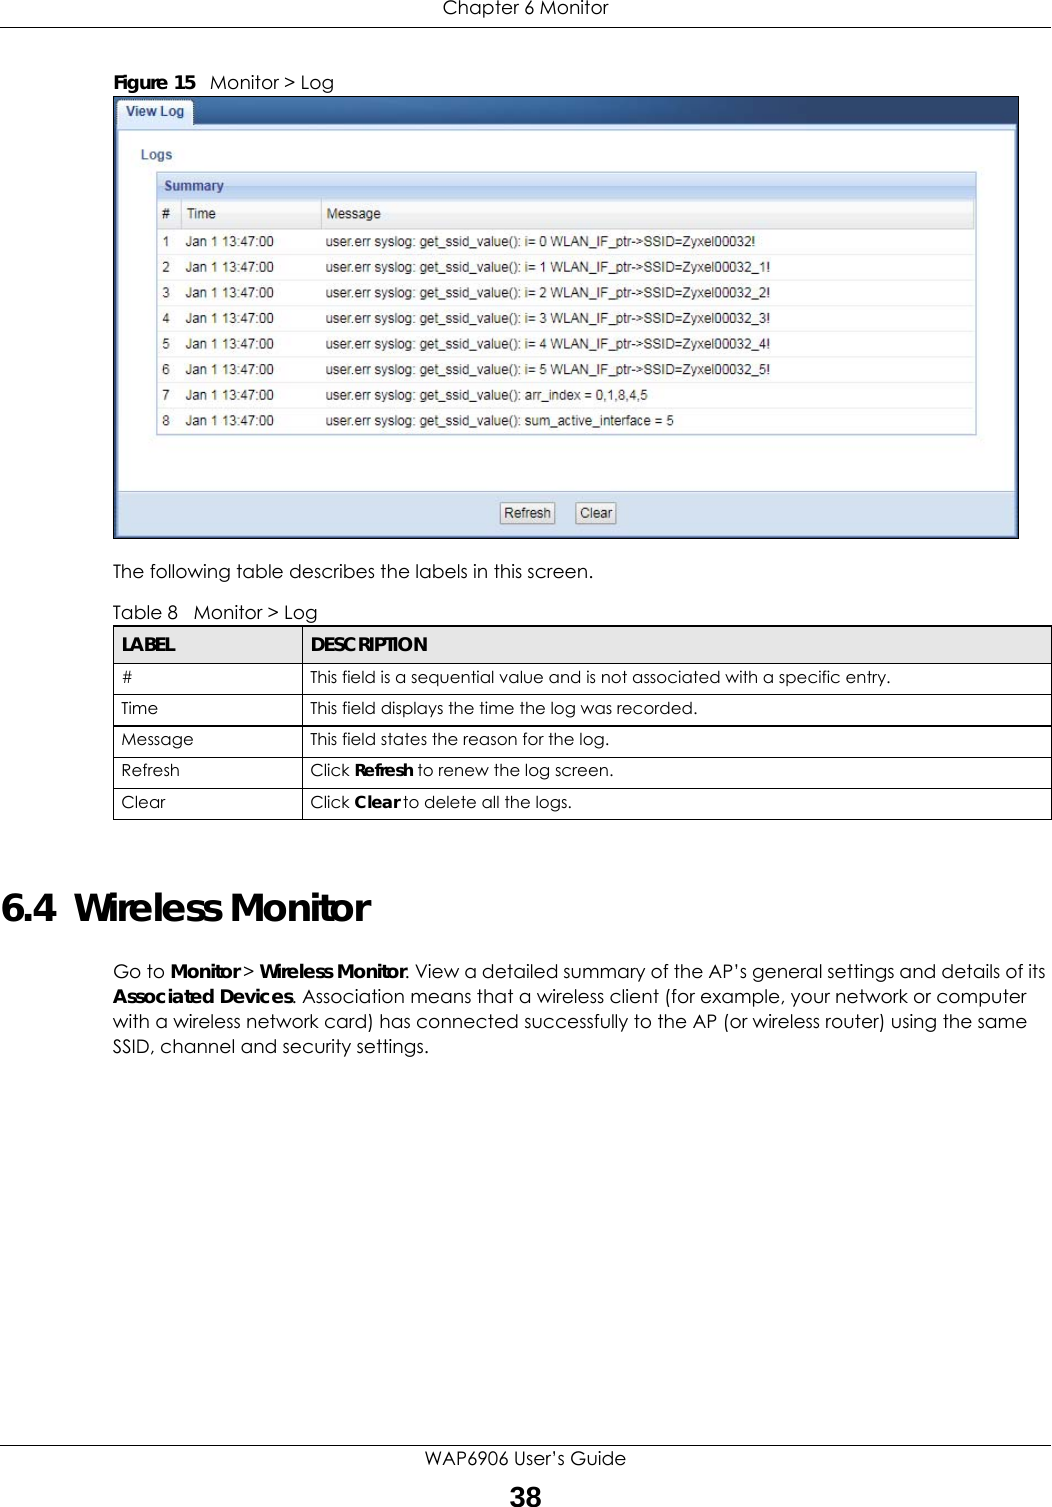 Chapter 6 MonitorWAP6906 User’s Guide38Figure 15   Monitor &gt; Log The following table describes the labels in this screen.6.4  Wireless Monitor     Go to Monitor &gt; Wireless Monitor. View a detailed summary of the AP’s general settings and details of its Associated Devices. Association means that a wireless client (for example, your network or computer with a wireless network card) has connected successfully to the AP (or wireless router) using the same SSID, channel and security settings.Table 8   Monitor &gt; LogLABEL DESCRIPTION#This field is a sequential value and is not associated with a specific entry.Time  This field displays the time the log was recorded. Message This field states the reason for the log.Refresh Click Refresh to renew the log screen. Clear Click Clear to delete all the logs. 